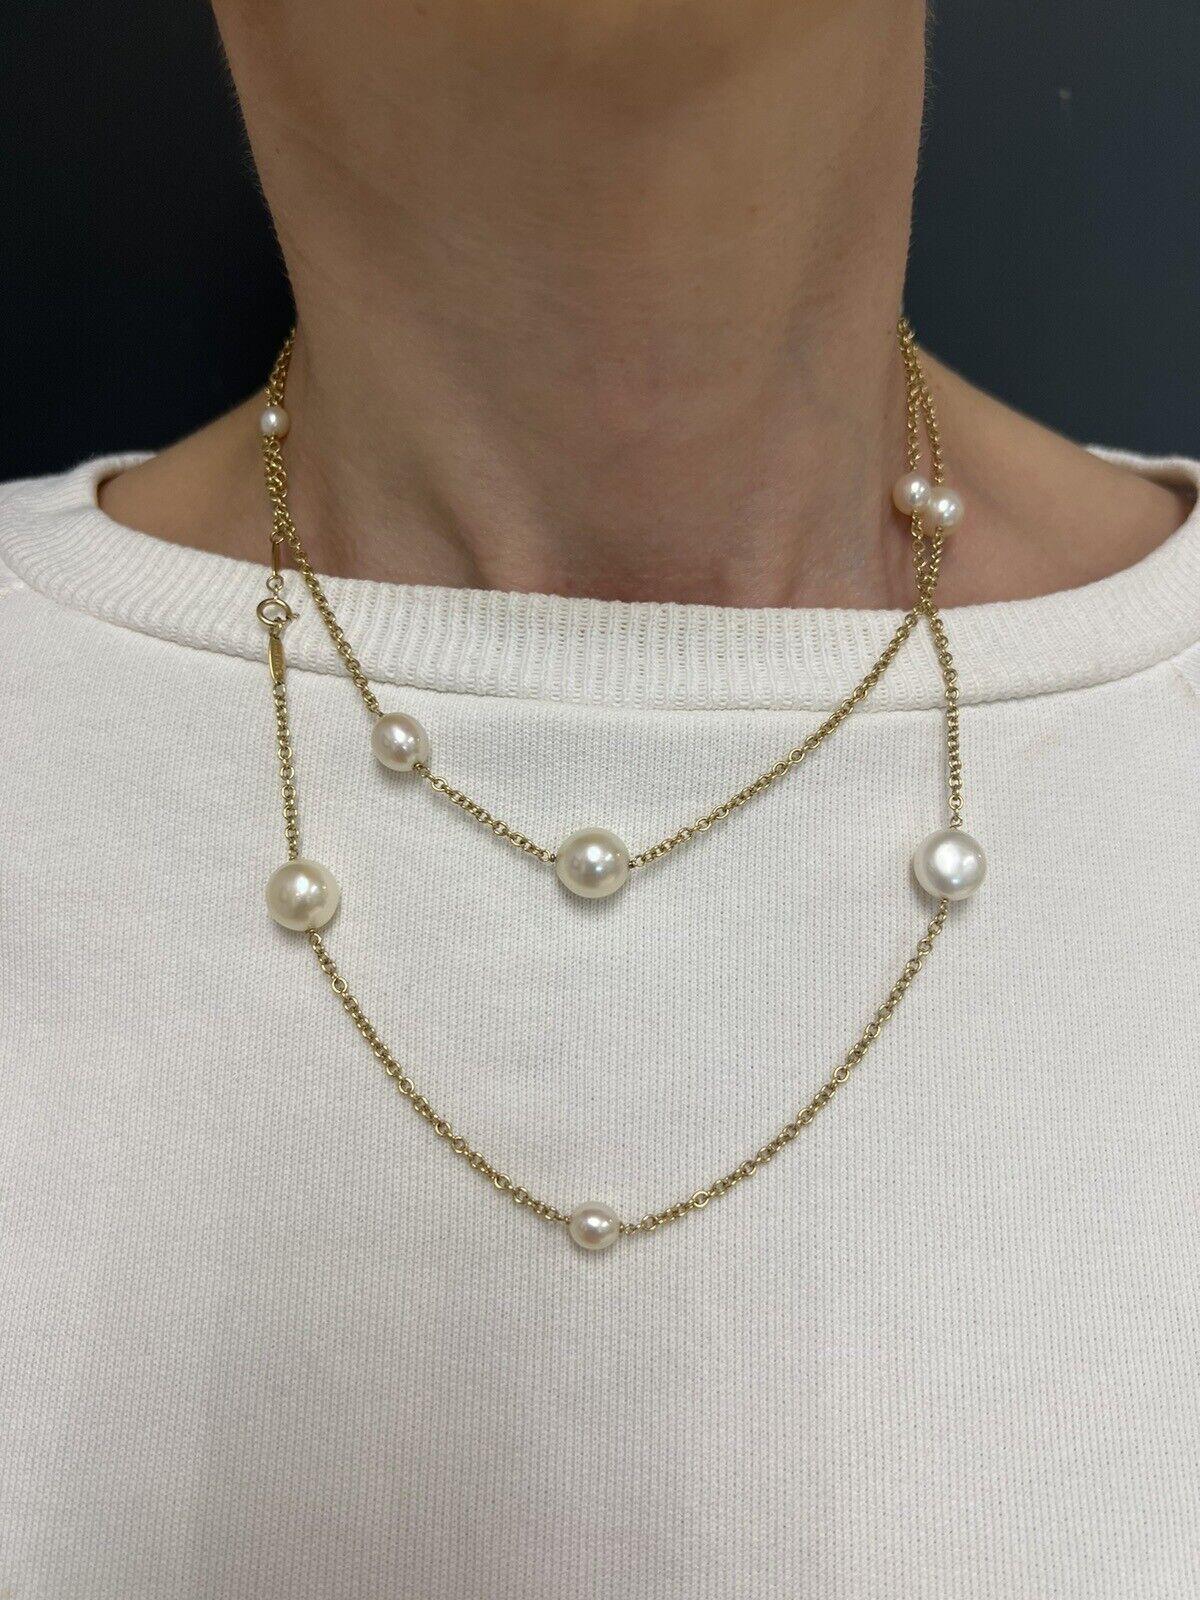 TIFFANY & CO. ELSA PERETTI 18k Yellow Gold & Pearl Sautoir Necklace Vintage 1980 In Excellent Condition For Sale In Beverly Hills, CA